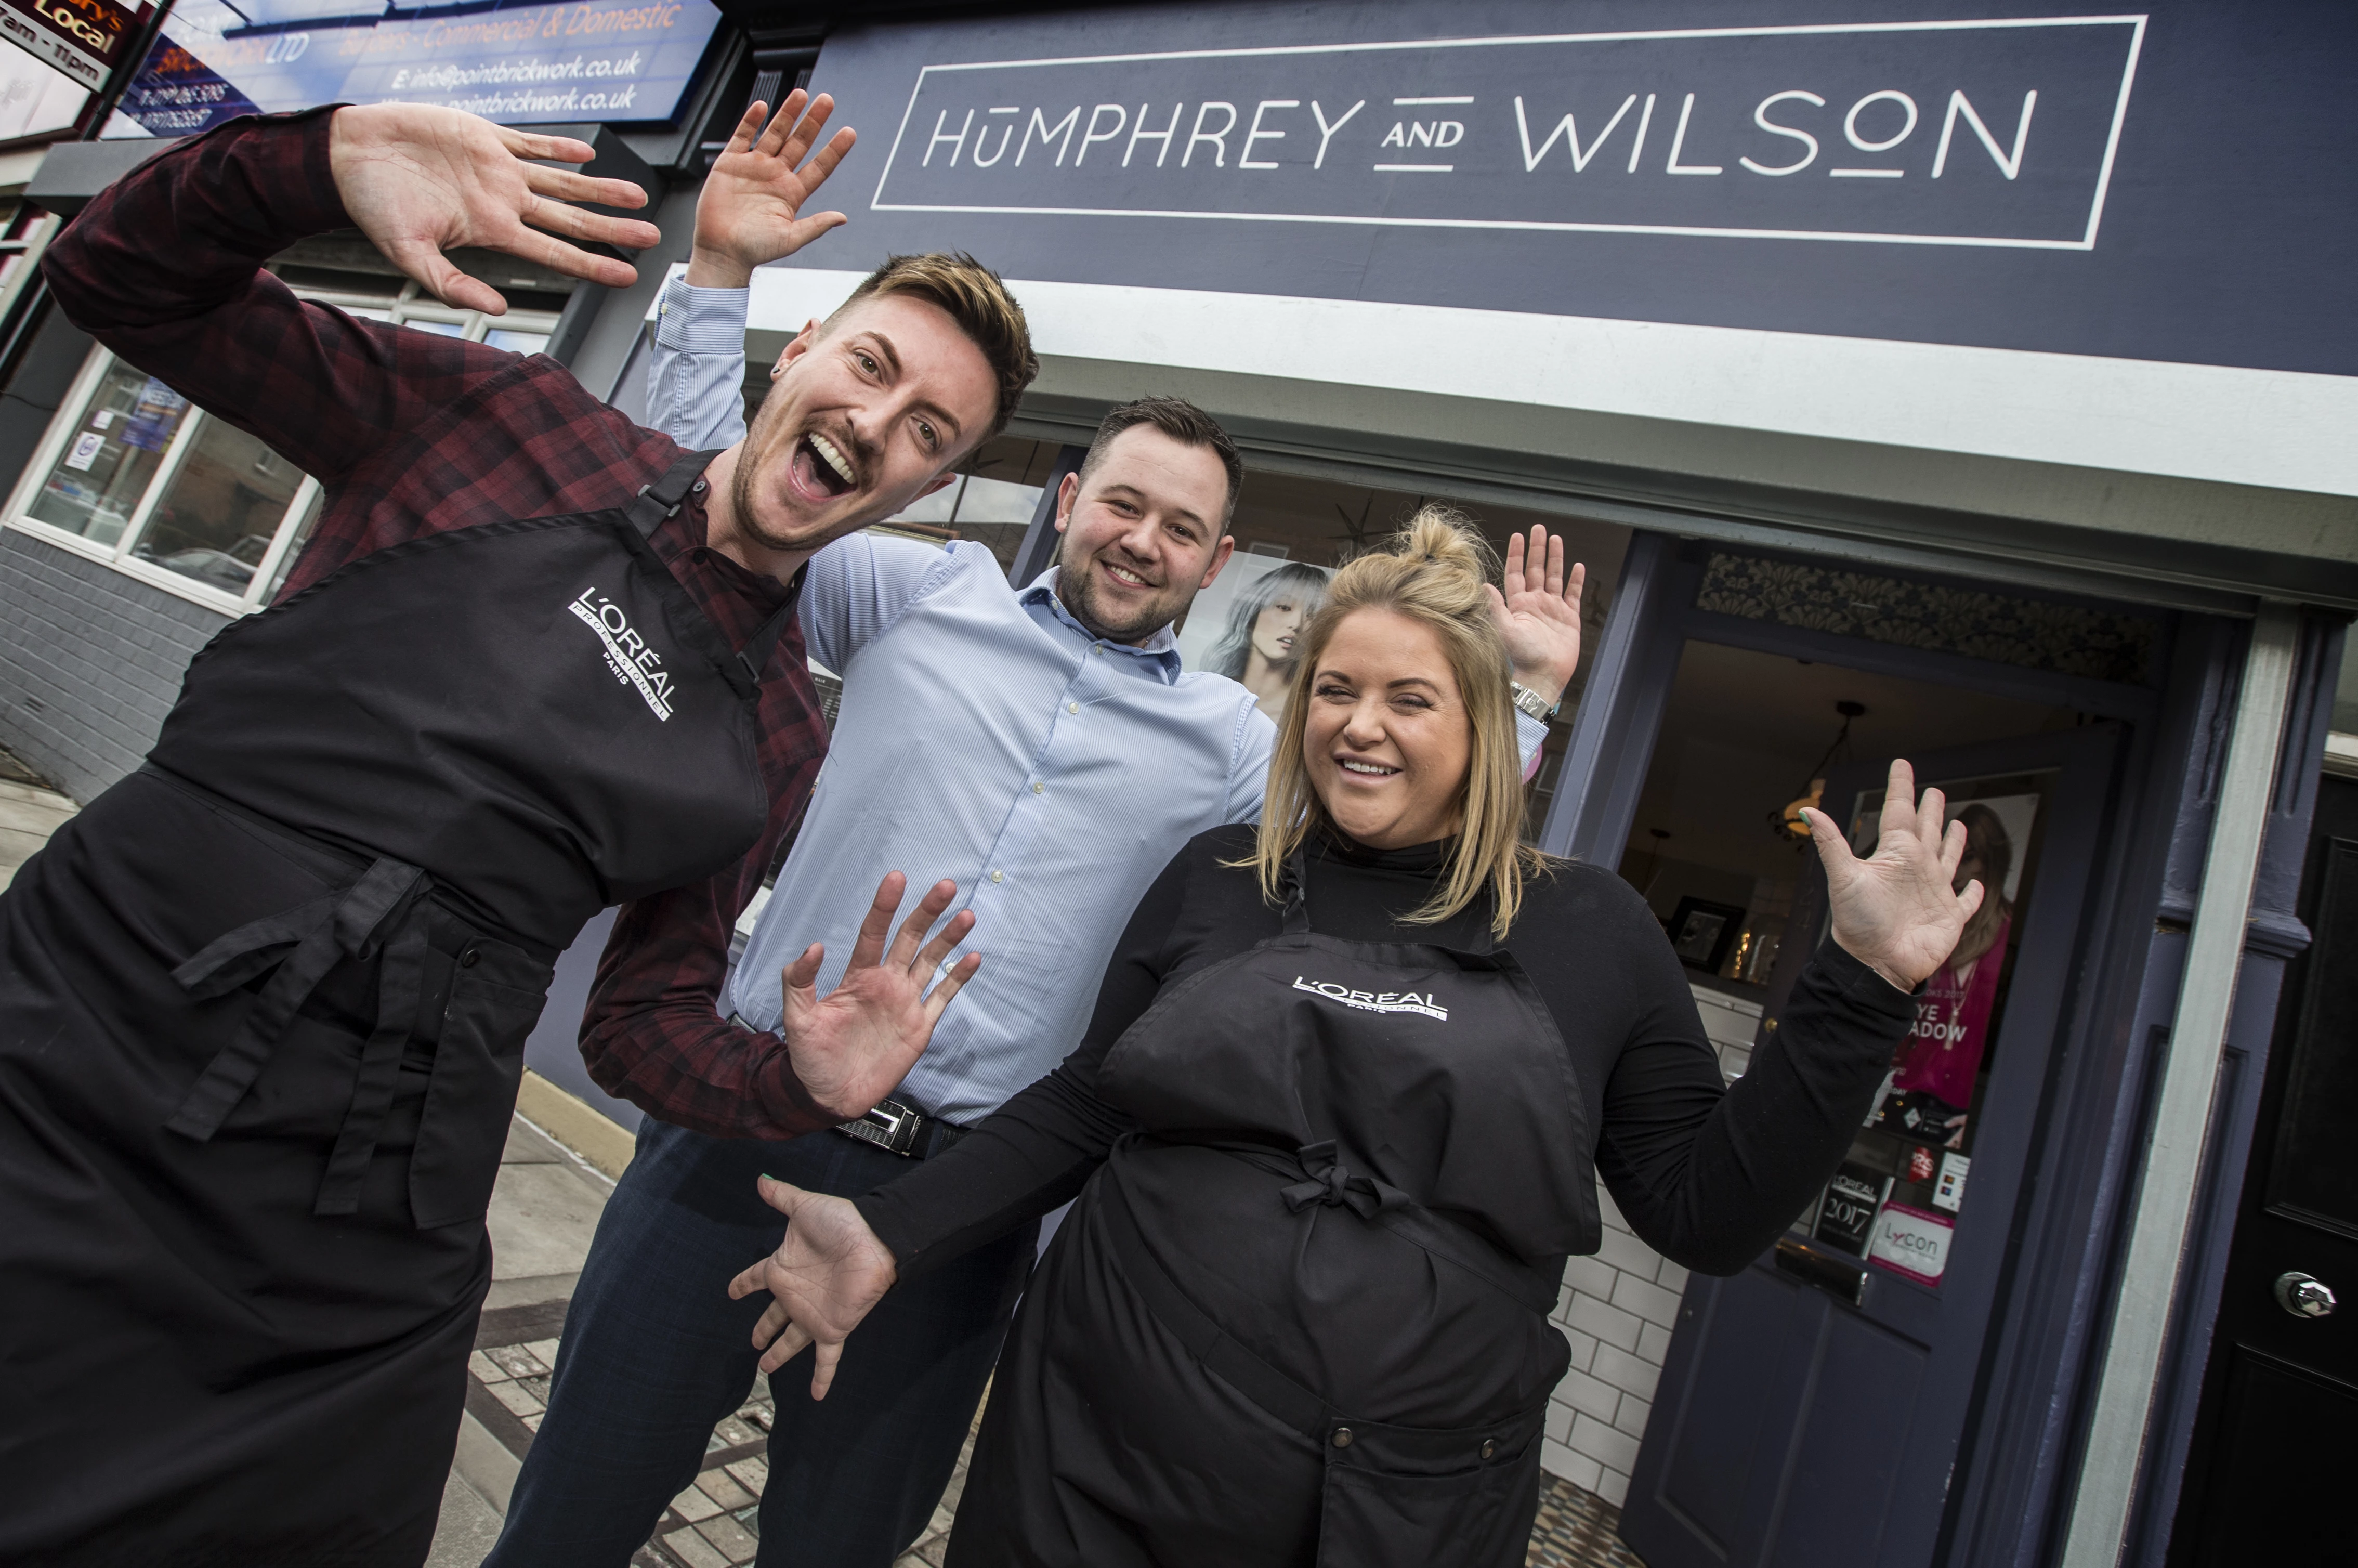 Photo caption: (Left to right) Salon co-owner Mark Humphrey, Robson Laidler’s Head of Cloud Accounting Nick Wilson, and salon co-owner Steph Wilson celebrating success. 